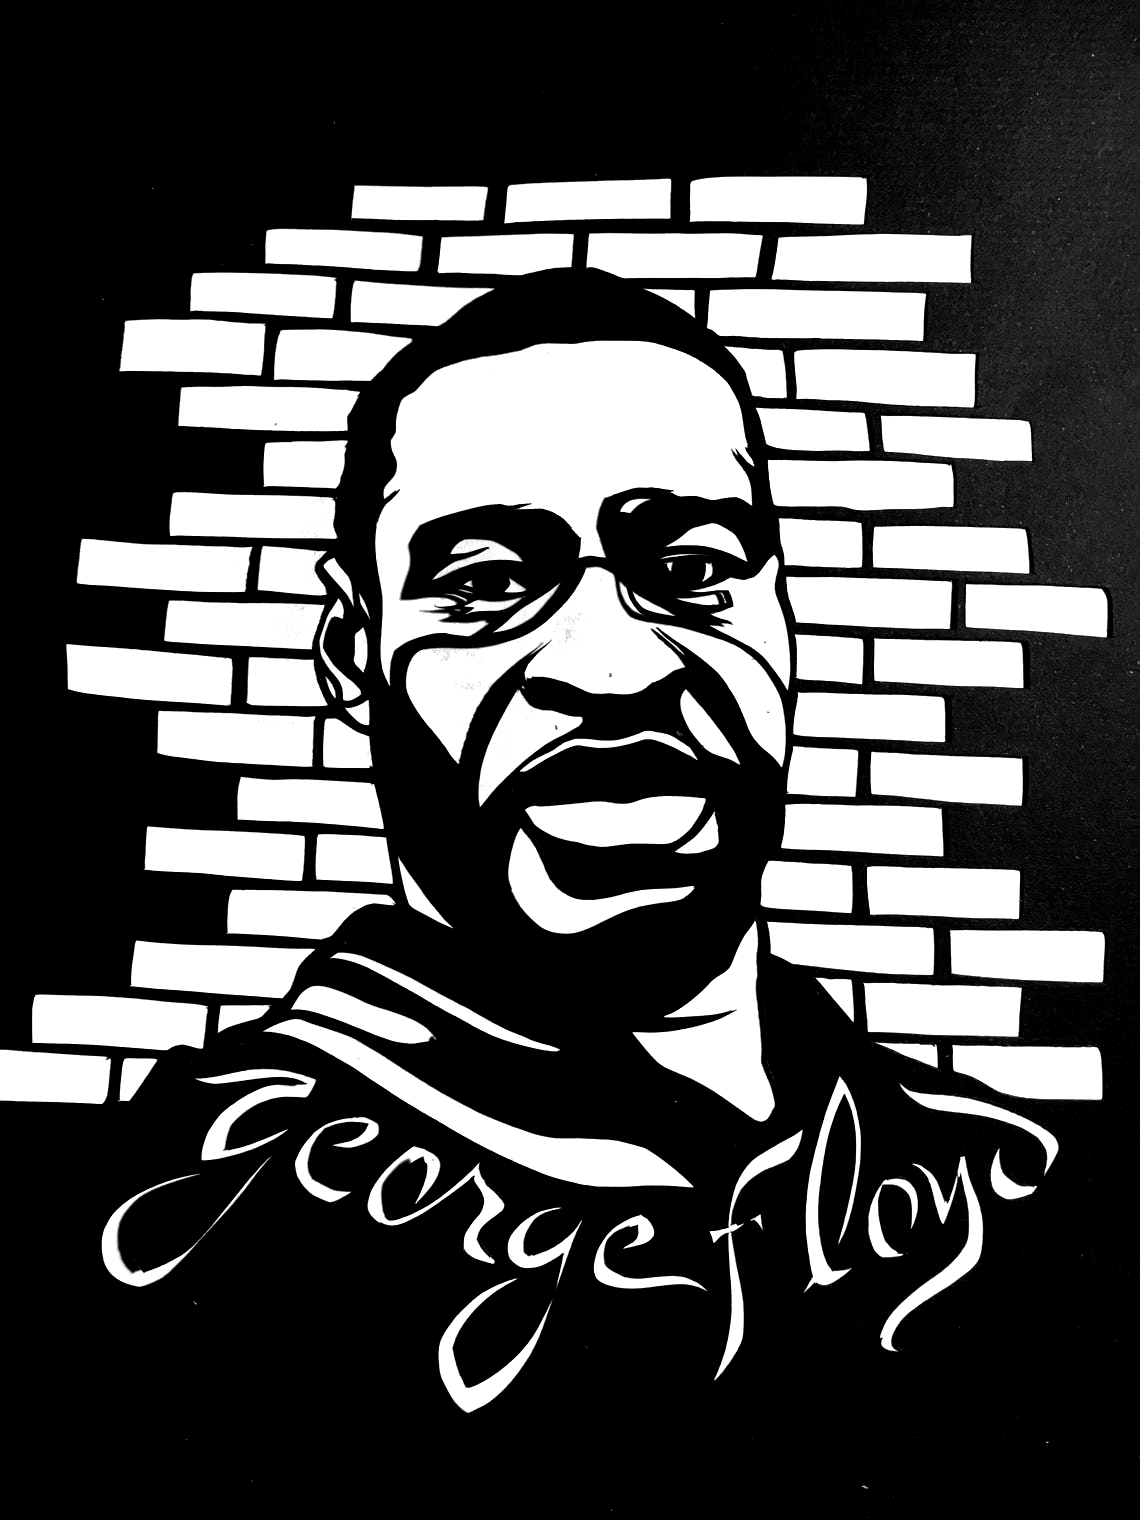 George Floyd Commemorative Card - We Can't Breathe Series